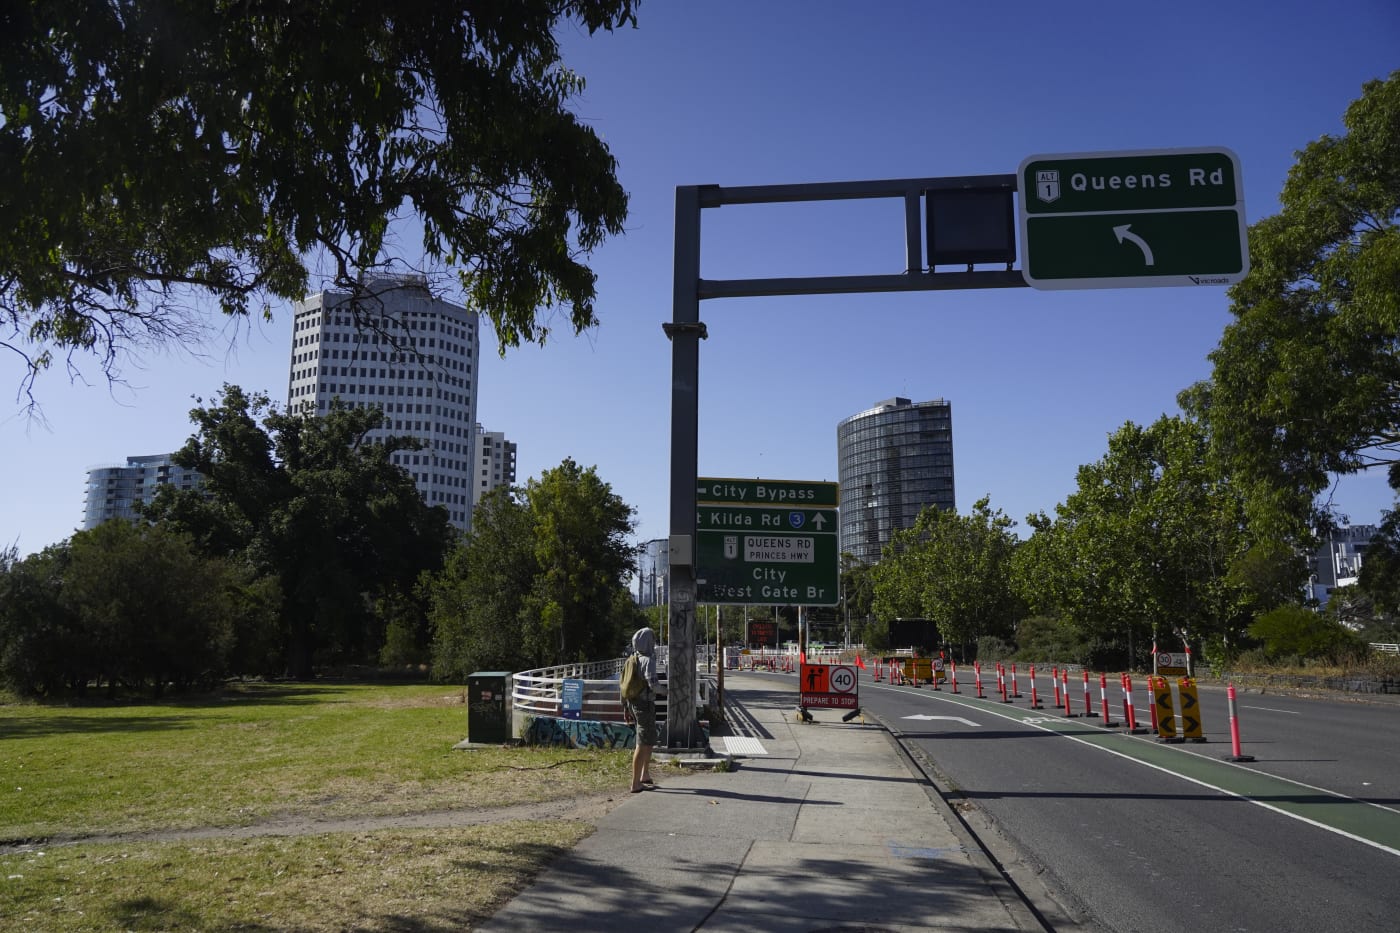 Entrance to the 'Ngargee' Tree Garden (seen on the left side of the image, next to St Kilda Rd)